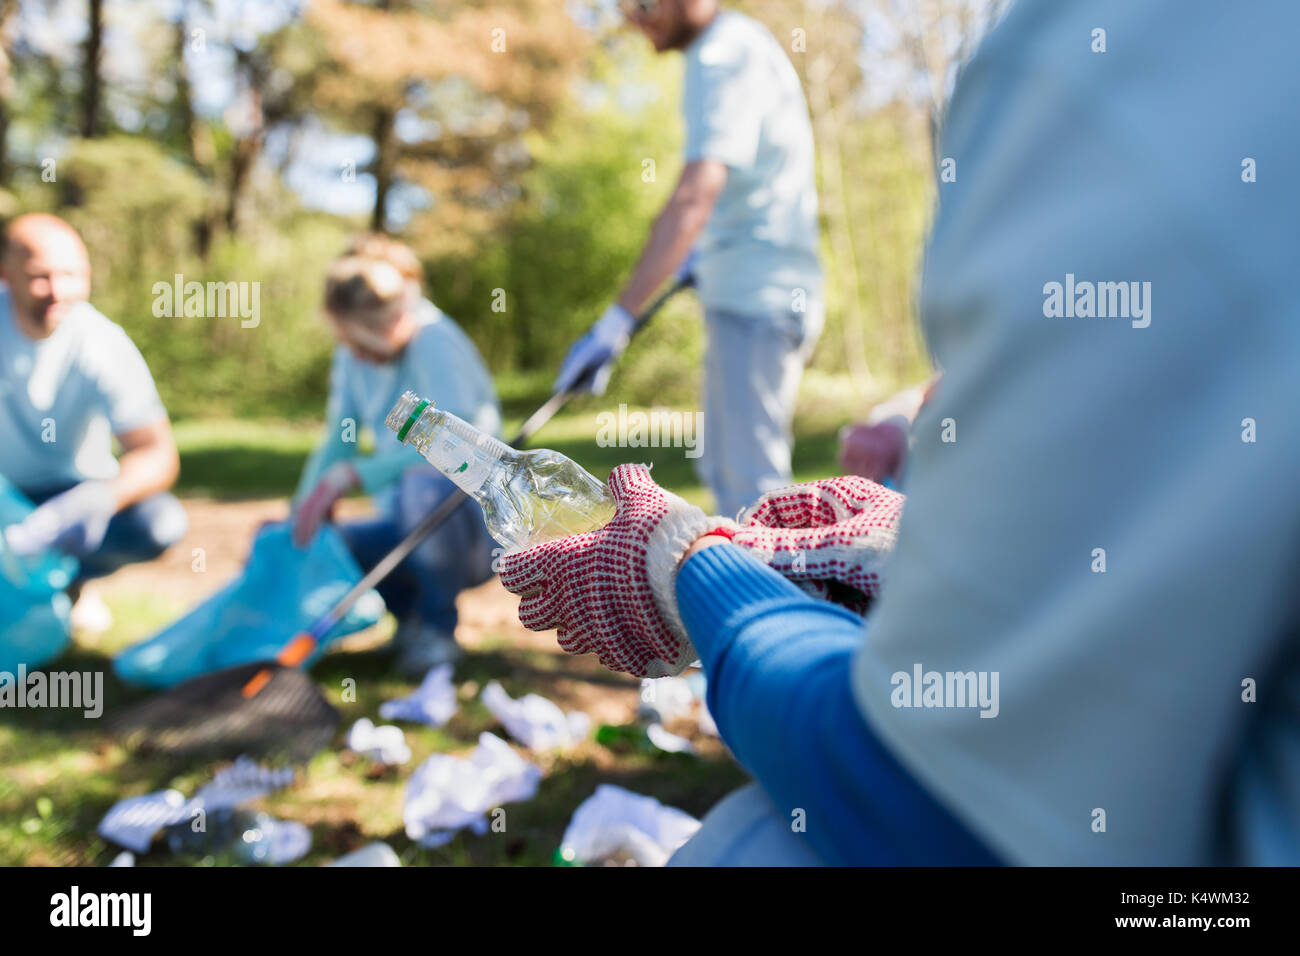 volunteer with trash bag and bottle cleaning area Stock Photo